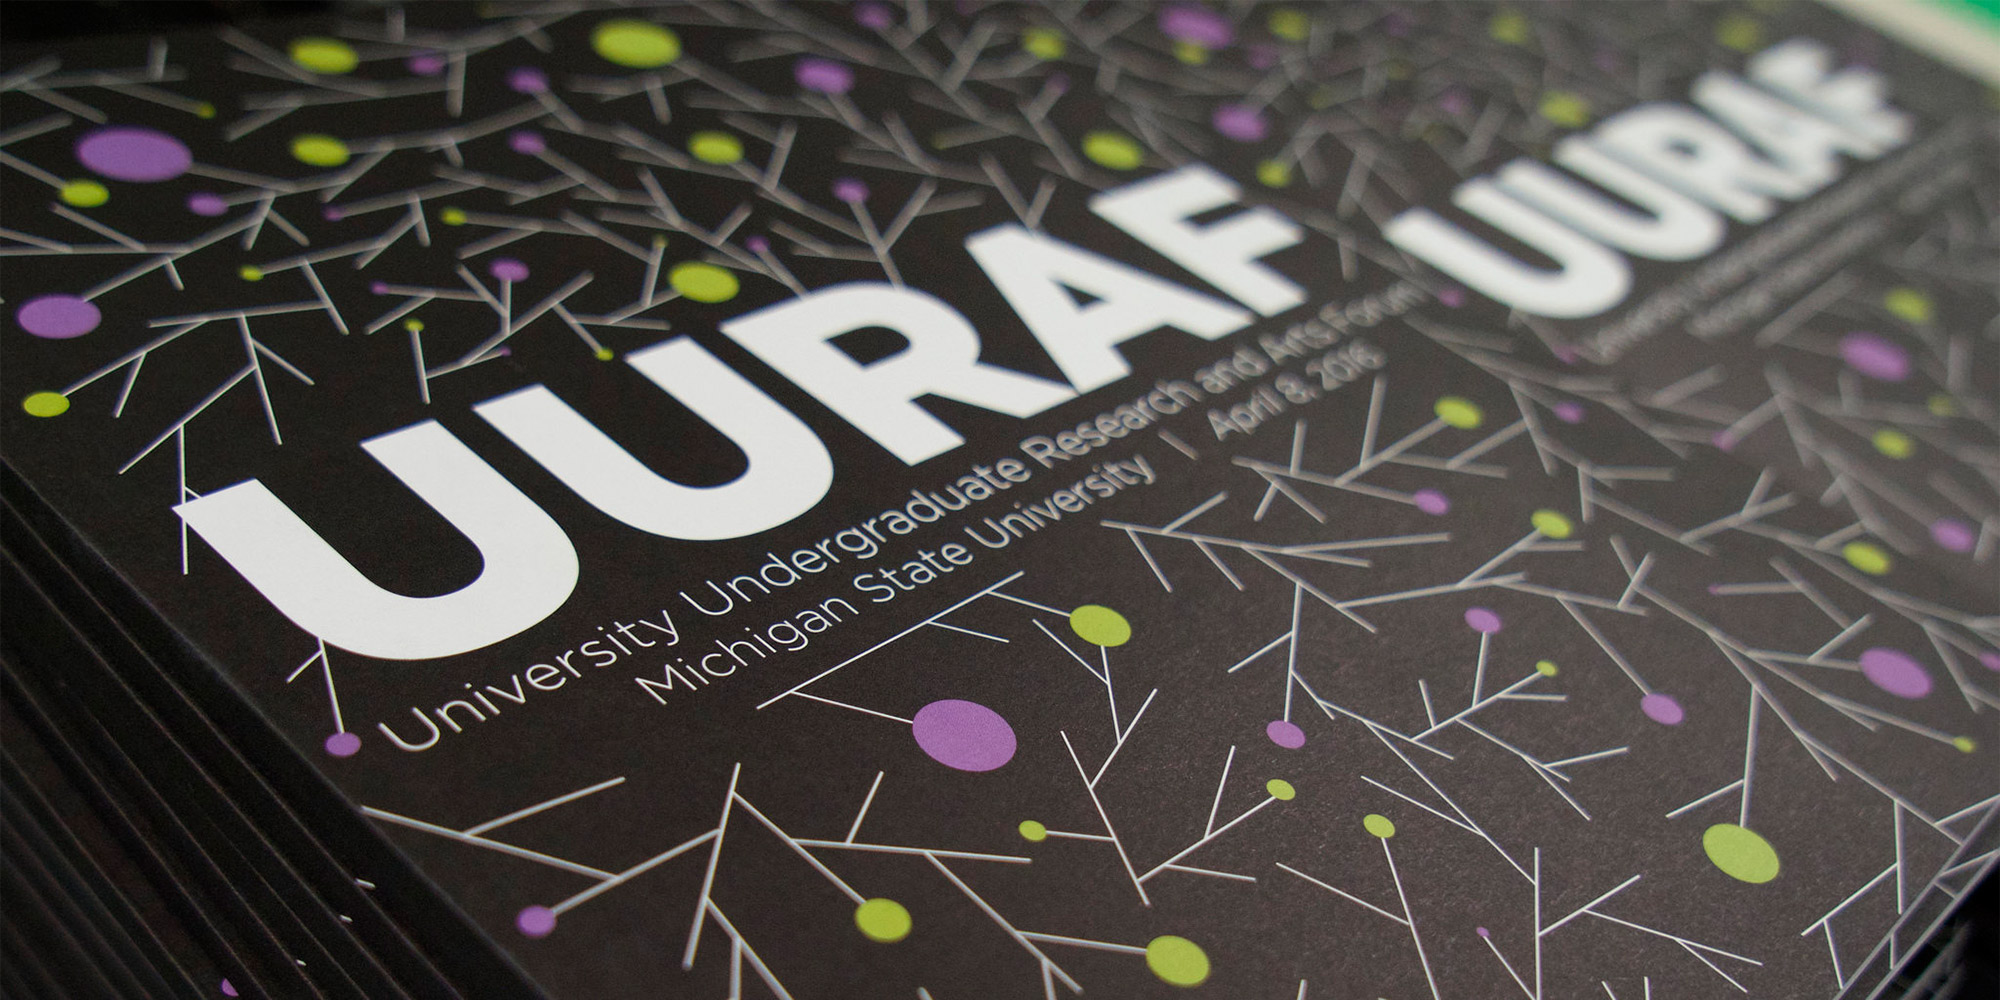 brochure with graphics that is titled "UURAF"